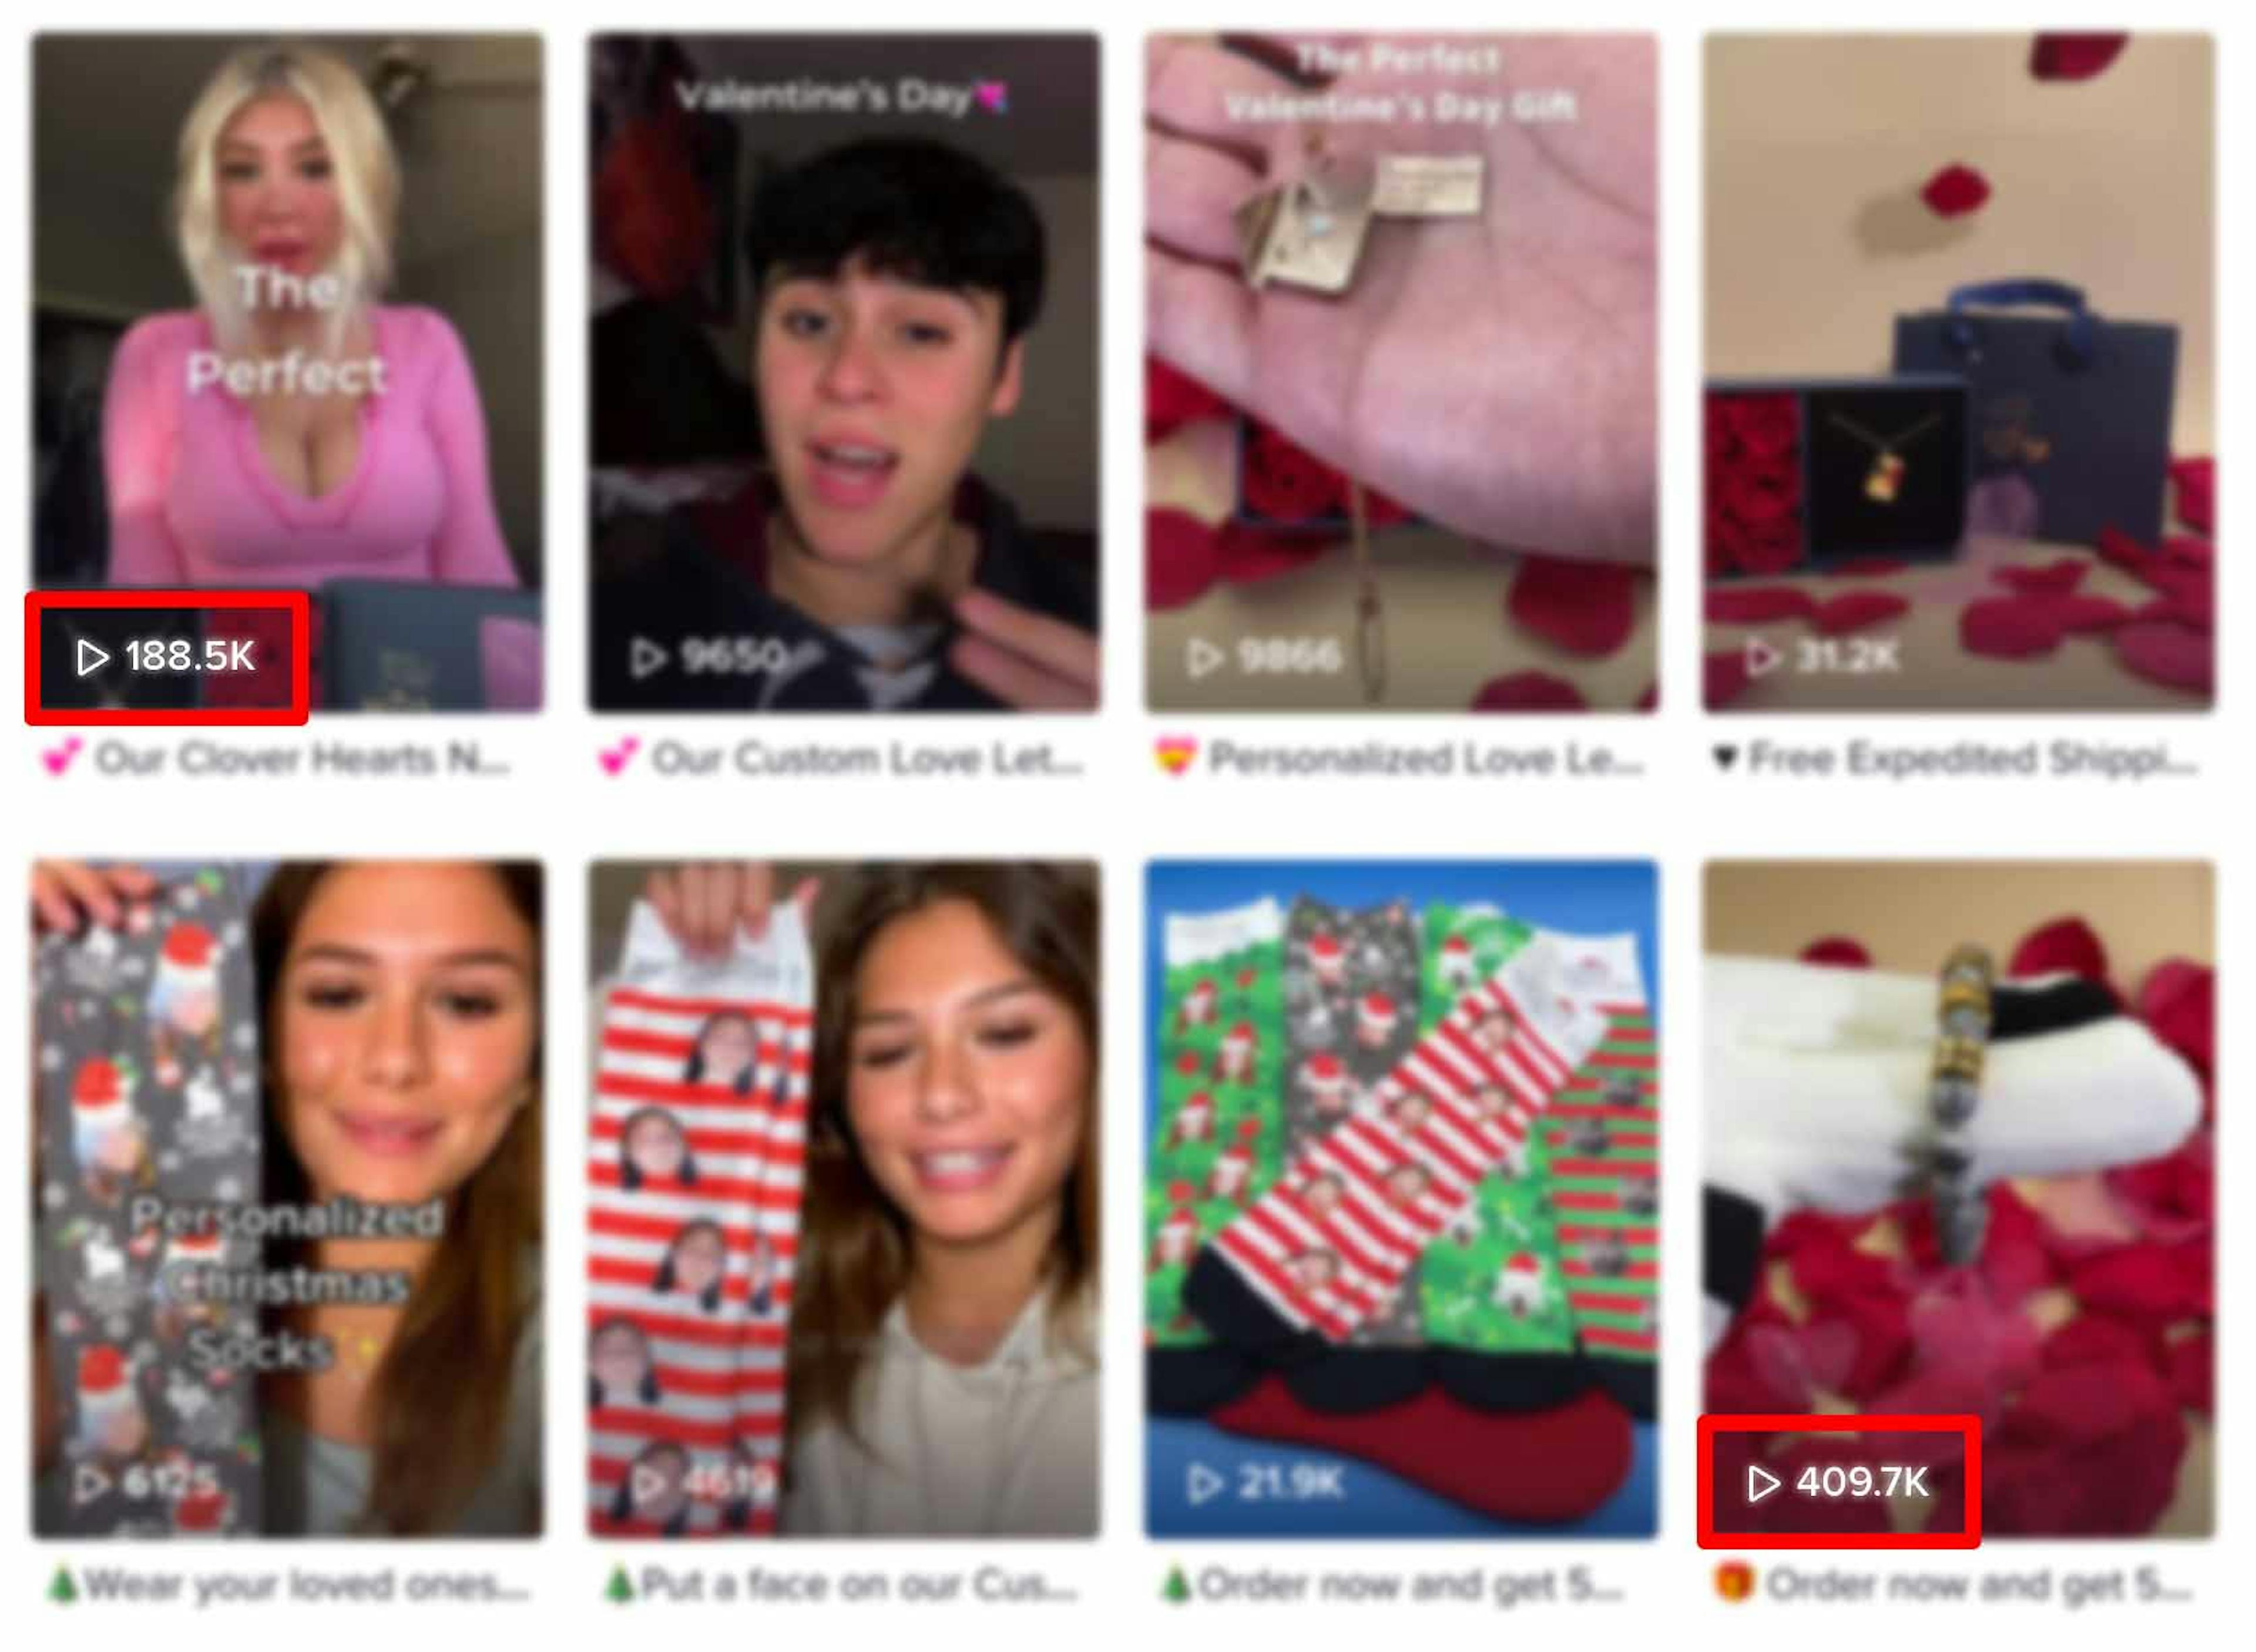 Good tiktok view results from consistent ugc posting